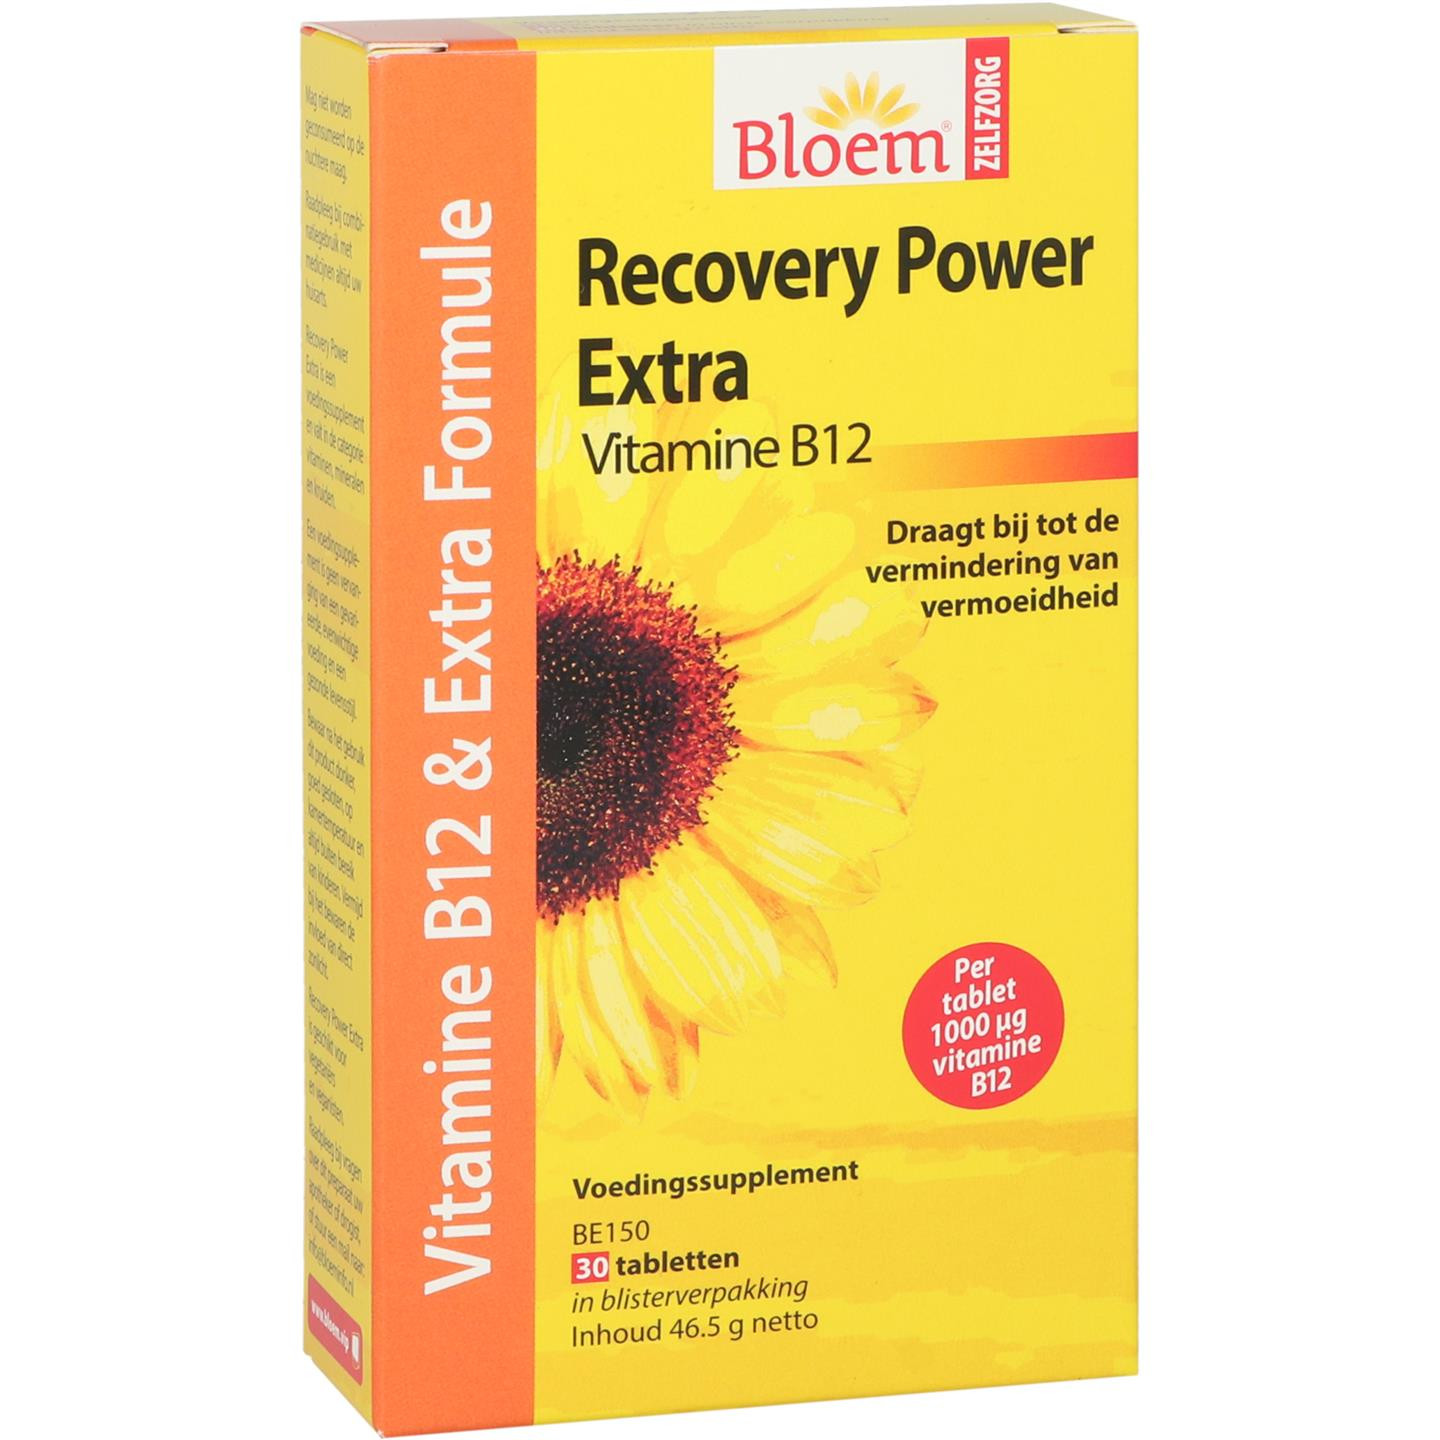 Recovery Power Extra